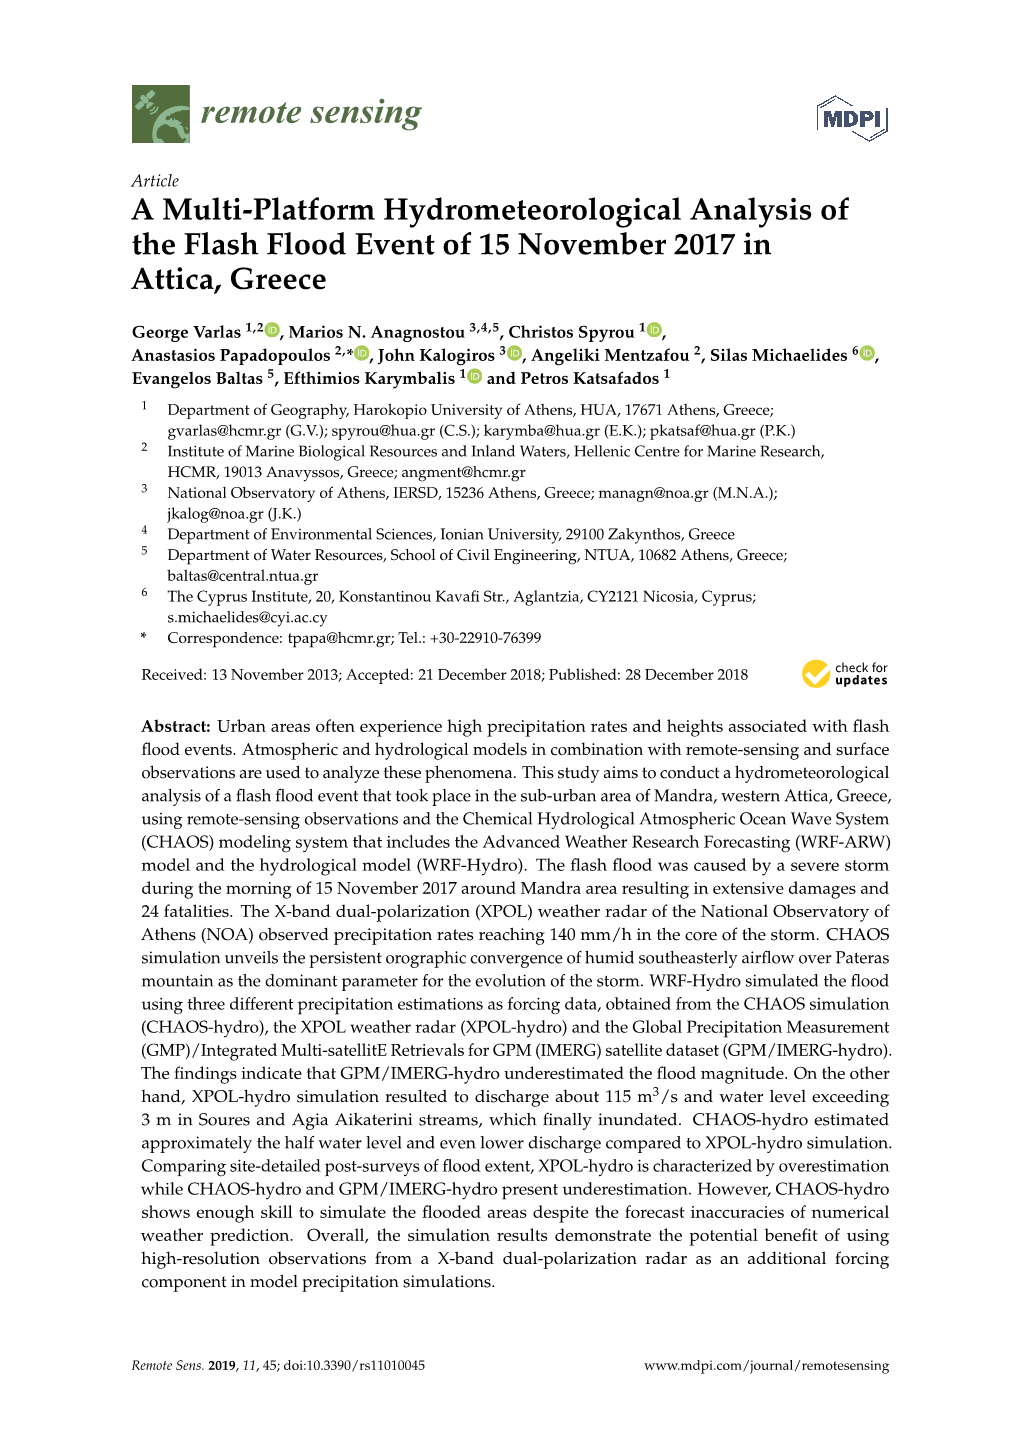 A Multi-Platform Hydrometeorological Analysis of the Flash Flood Event of 15 November 2017 in Attica, Greece